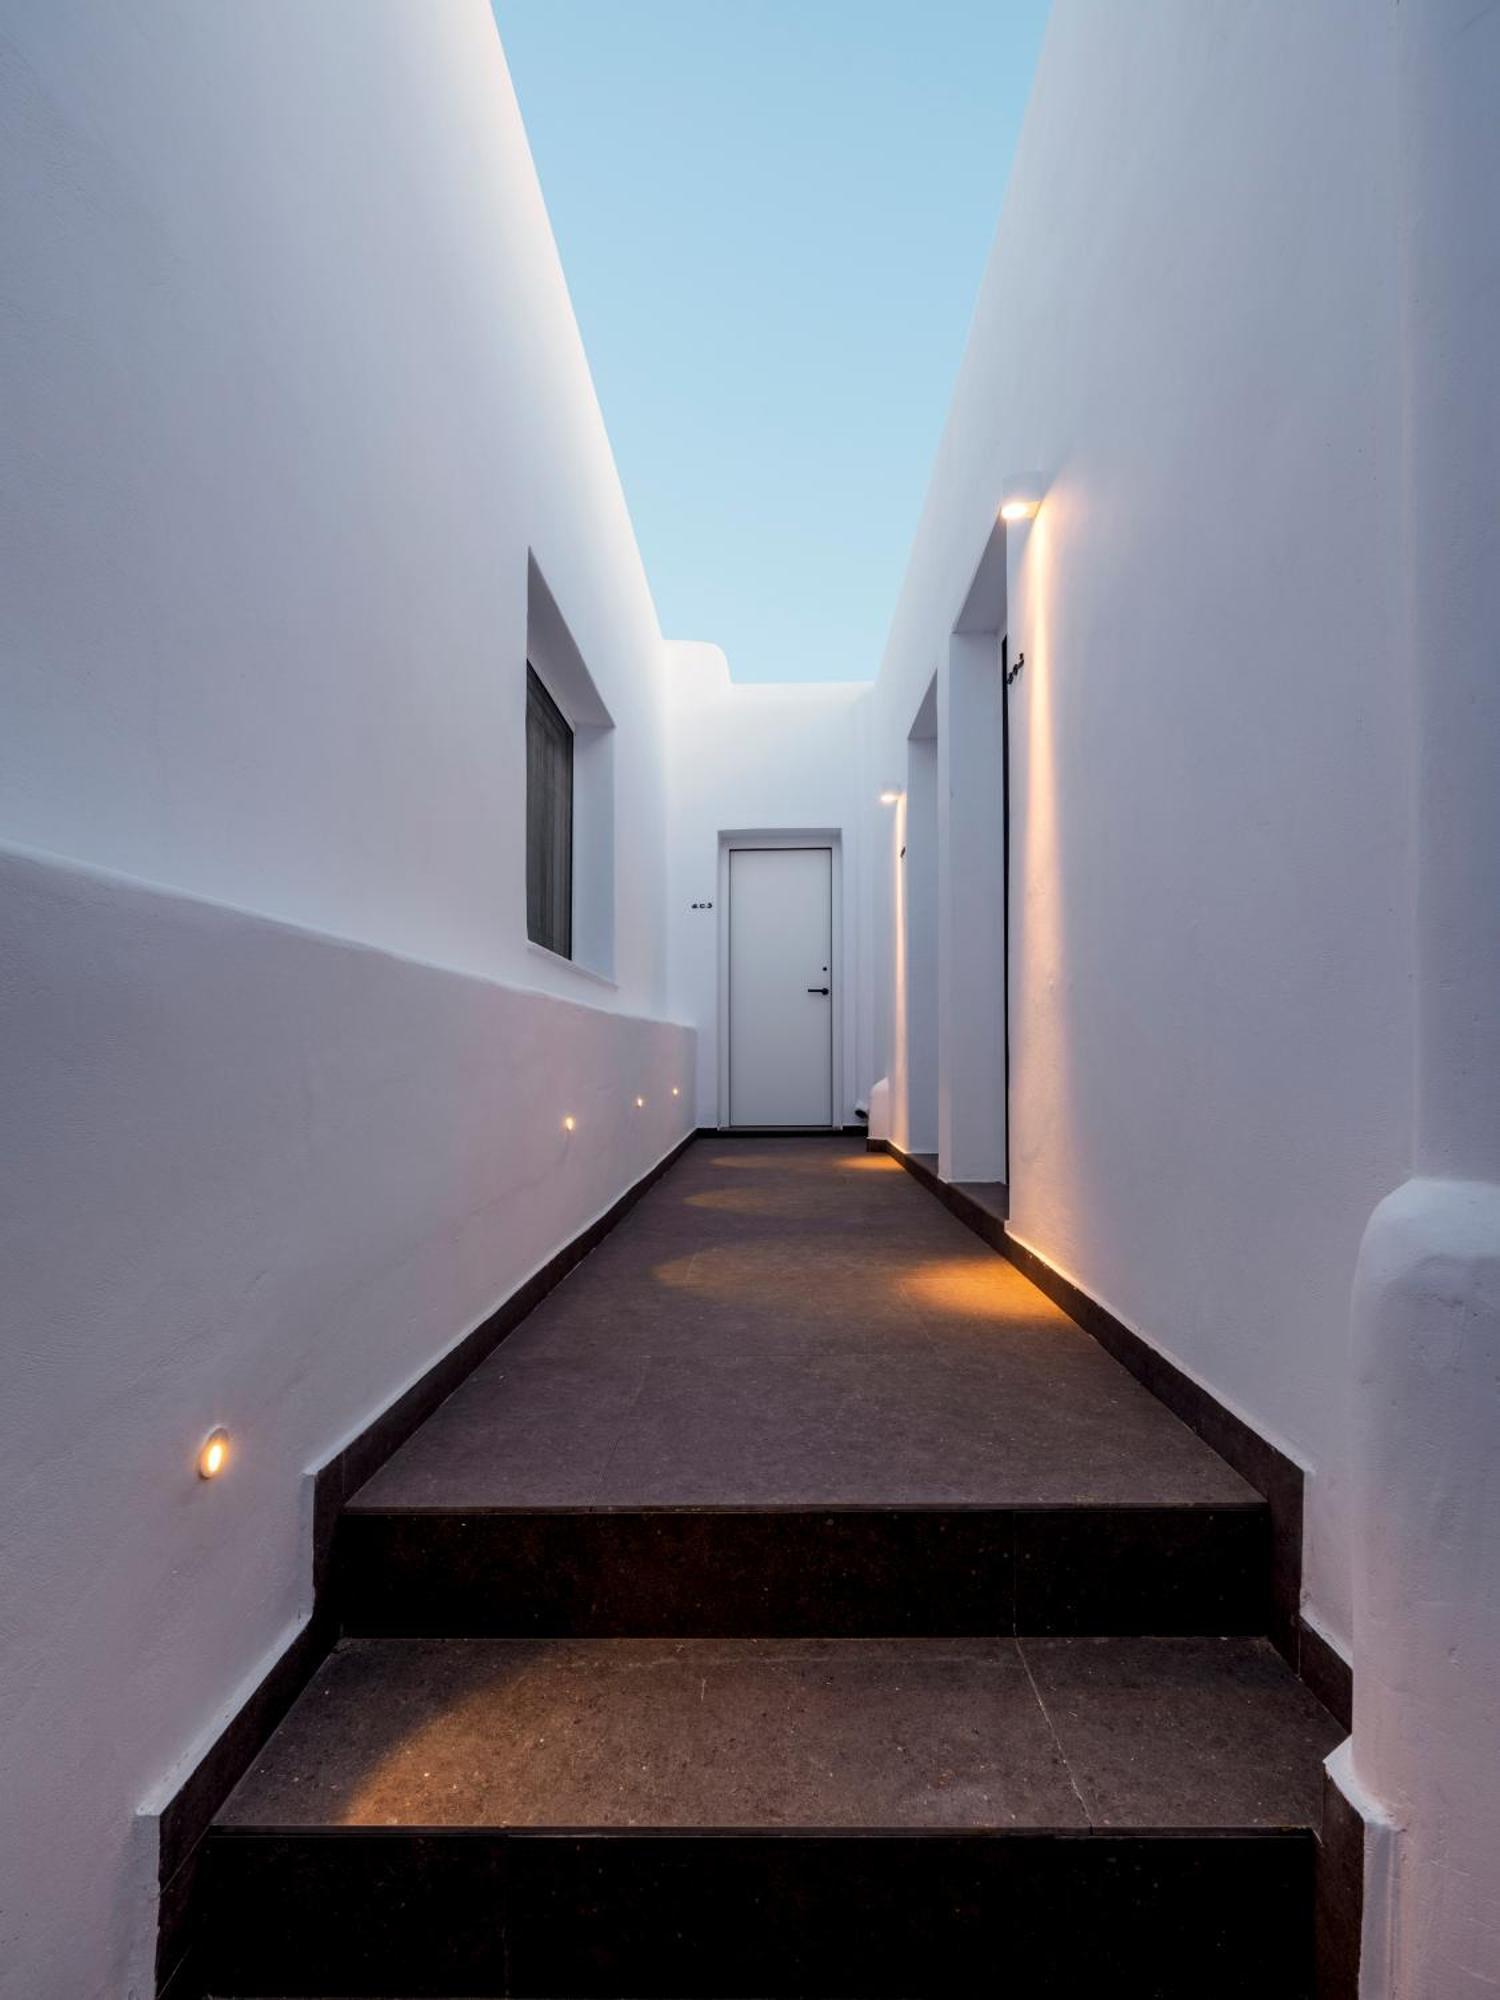 Yalos Hotel Sunset View Mykonos Town Private Rooms Exterior foto